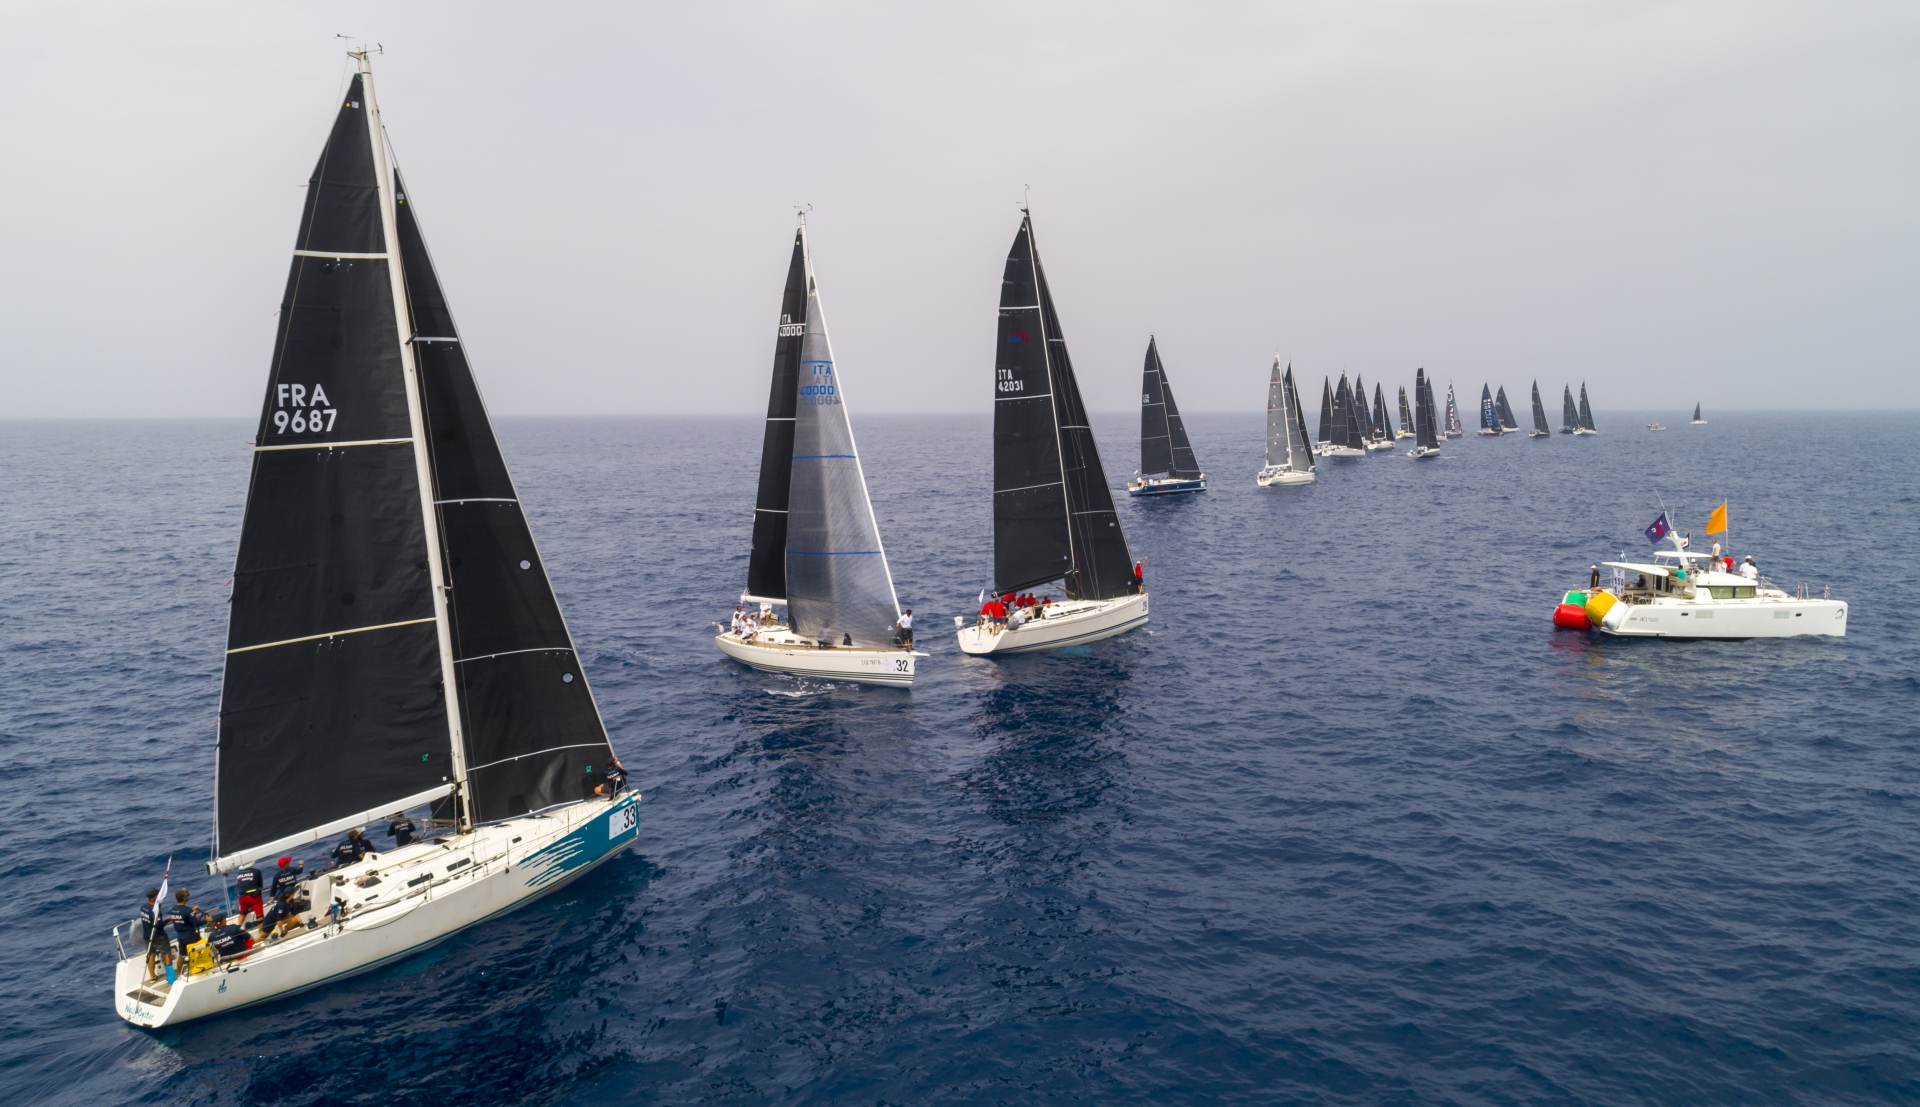 No racing on Day 3 of the 2022 ORC World Championship - Press Release - Yacht Club Costa Smeralda